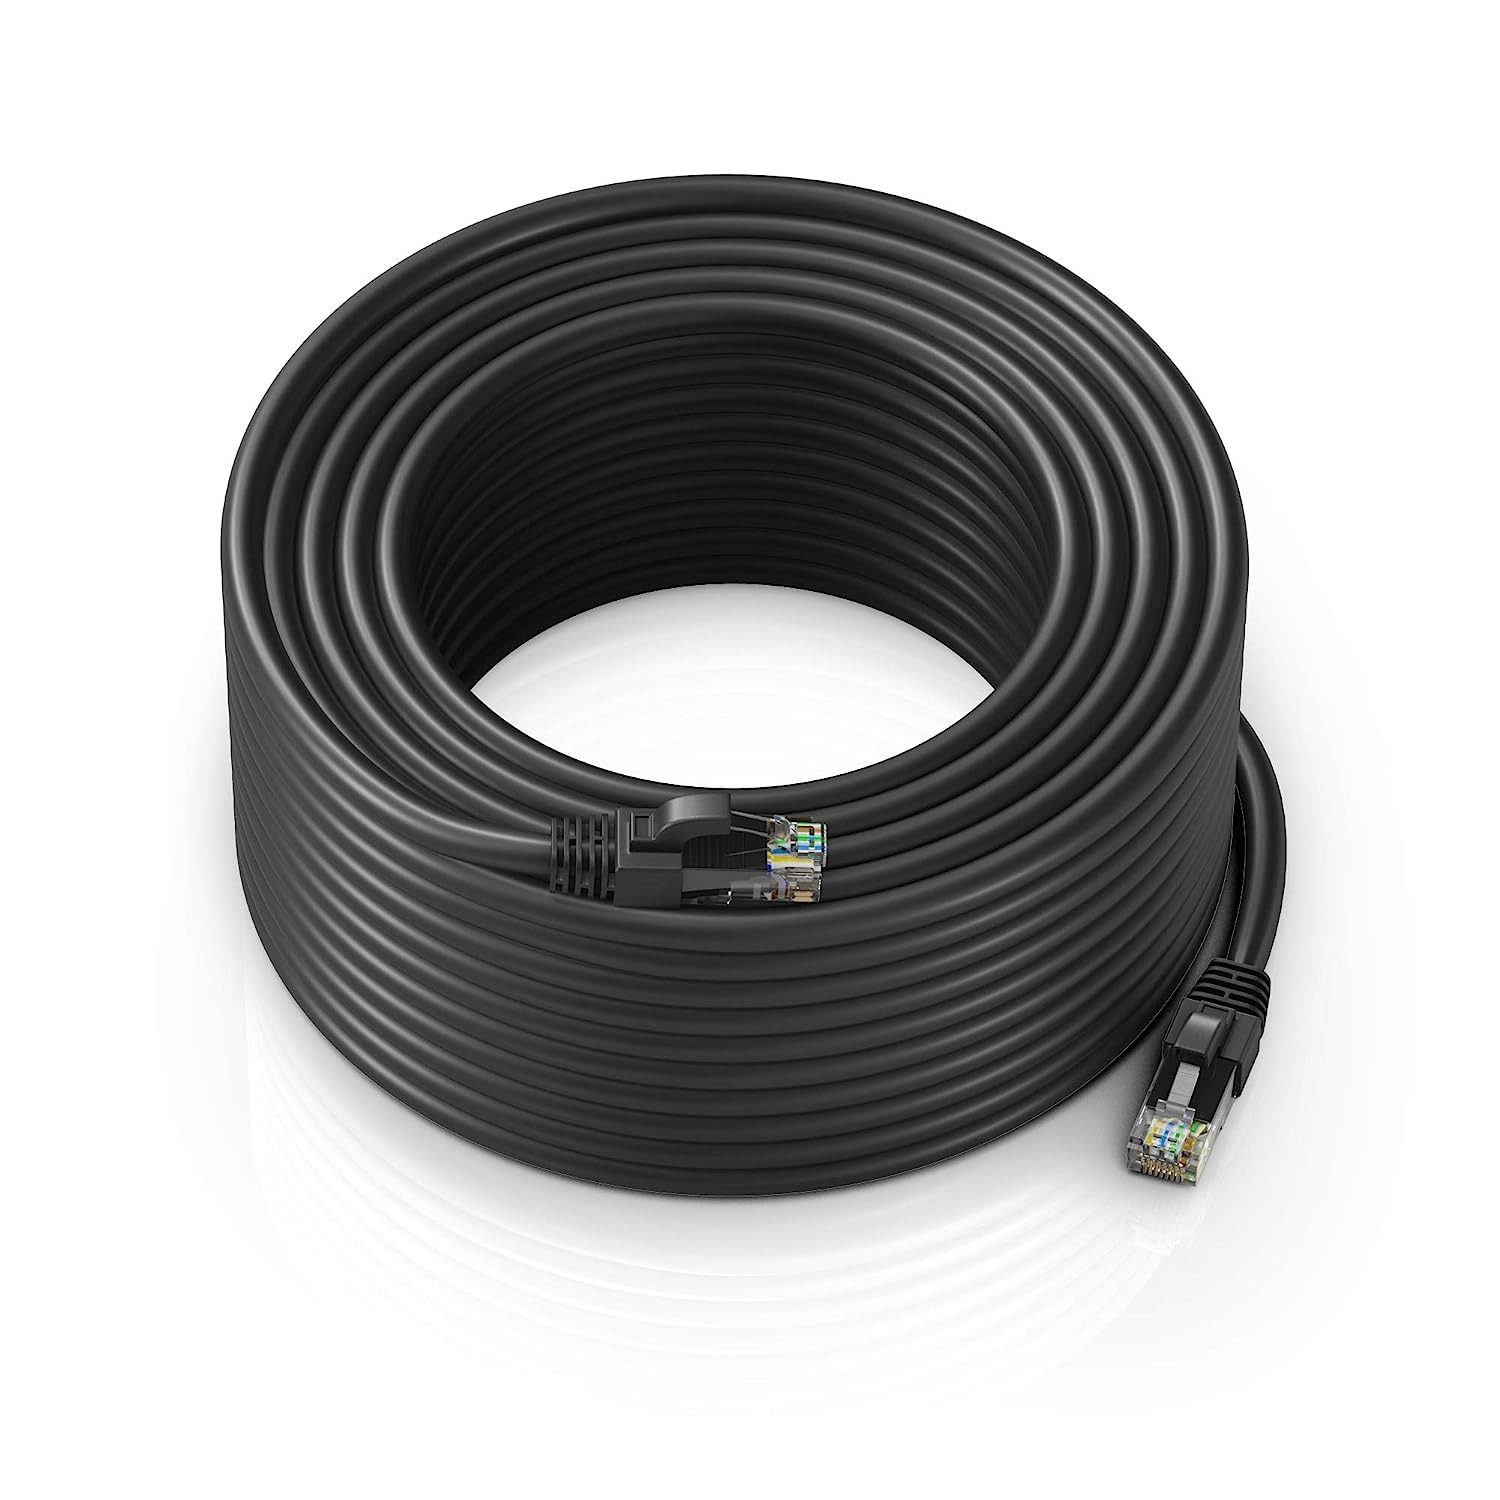 Ethernet Cable 300 Ft CAT6 High Speed Internet Network LAN Cable Cord, Outdoor W